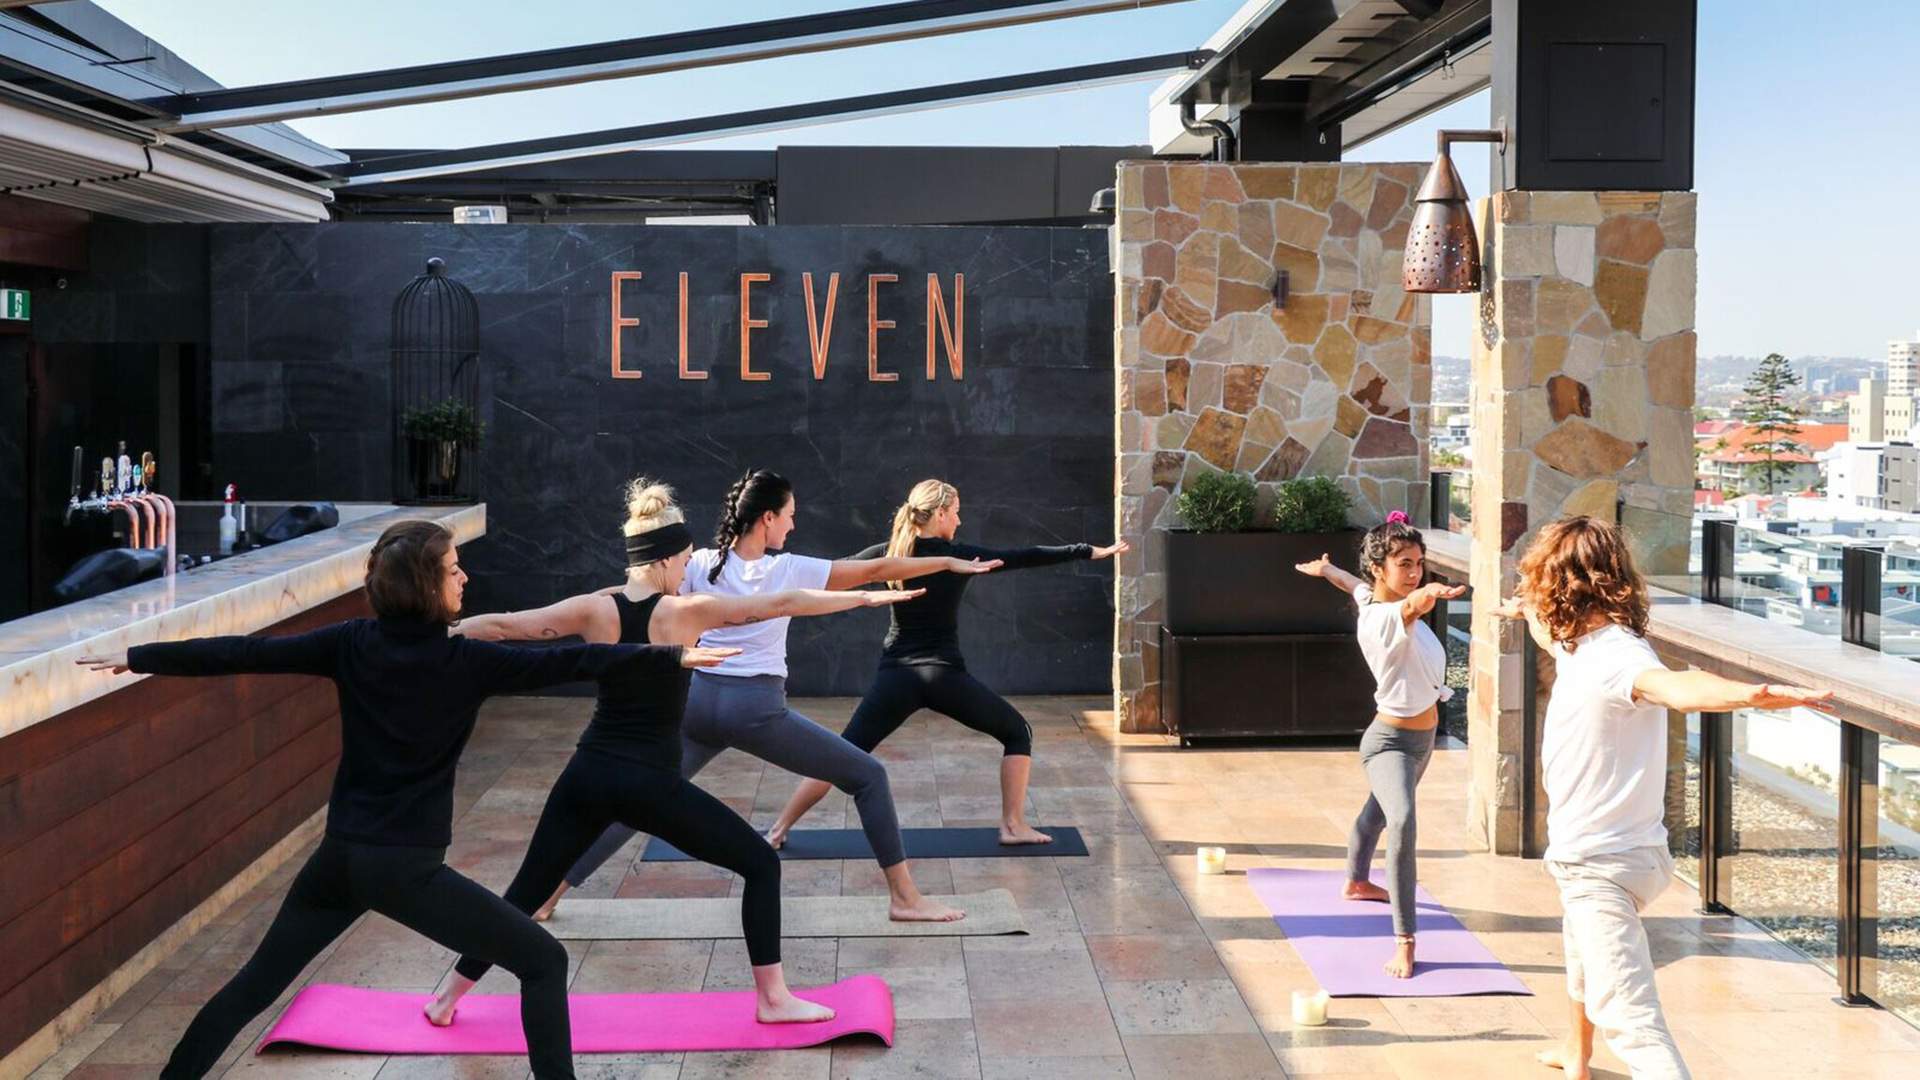 Brisbane's Eleven Rooftop Bar Is Hosting Free Wellness Classes With a View